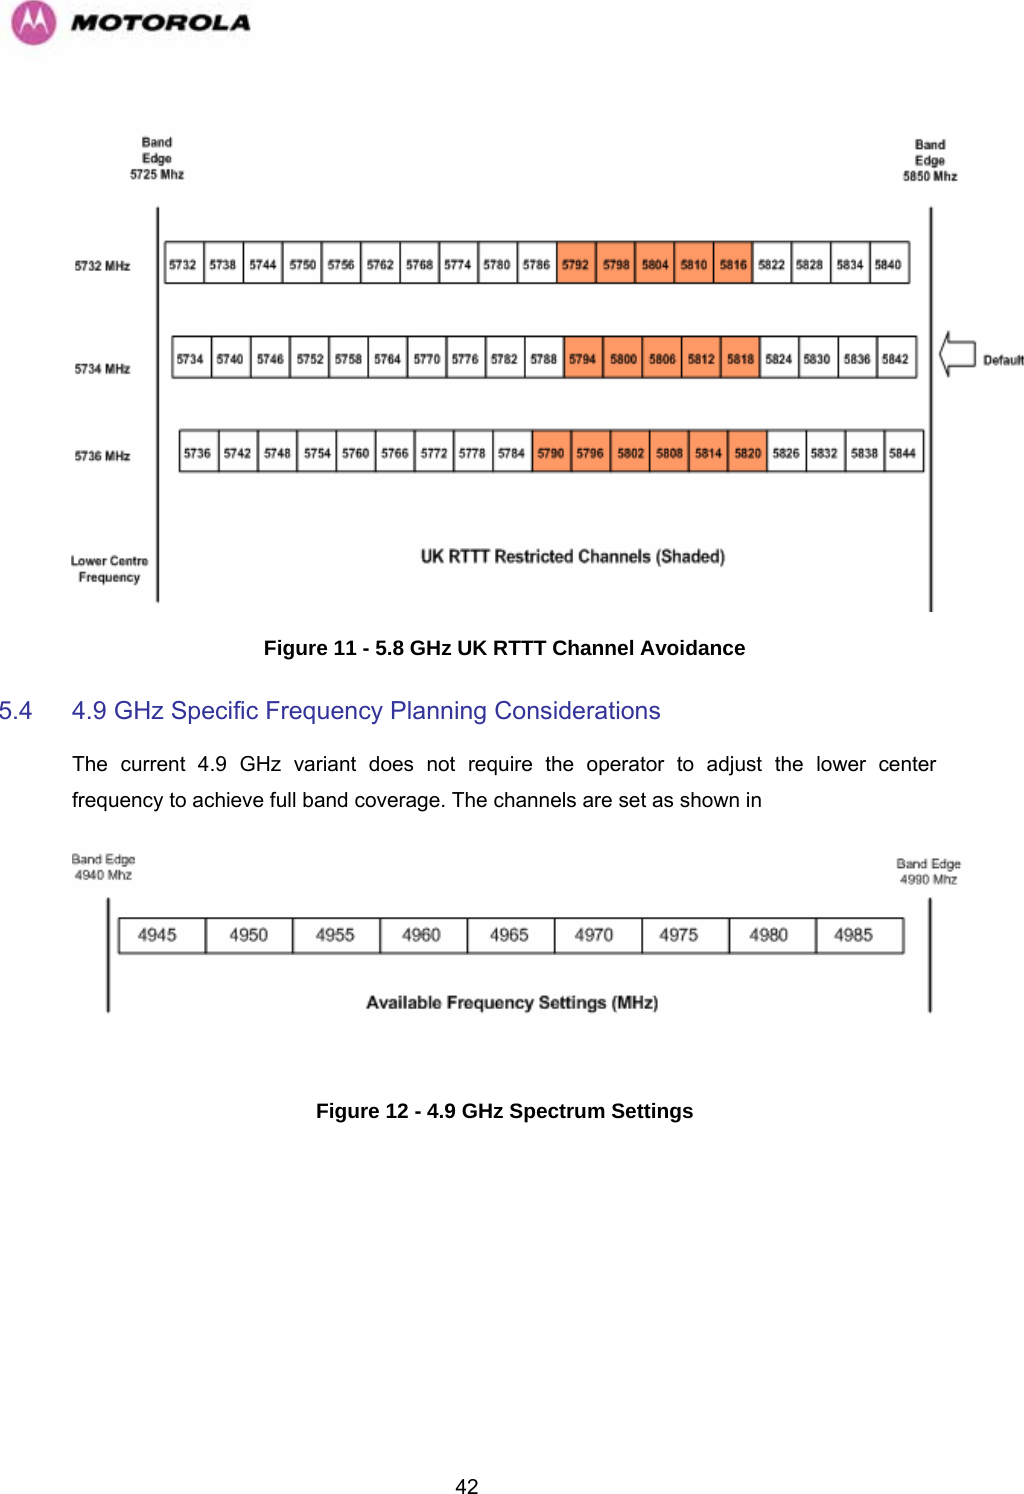   42 Figure 11 - 5.8 GHz UK RTTT Channel Avoidance 5.4  4.9 GHz Specific Frequency Planning Considerations The current 4.9 GHz variant does not require the operator to adjust the lower center frequency to achieve full band coverage. The channels are set as shown in    Figure 12 - 4.9 GHz Spectrum Settings 